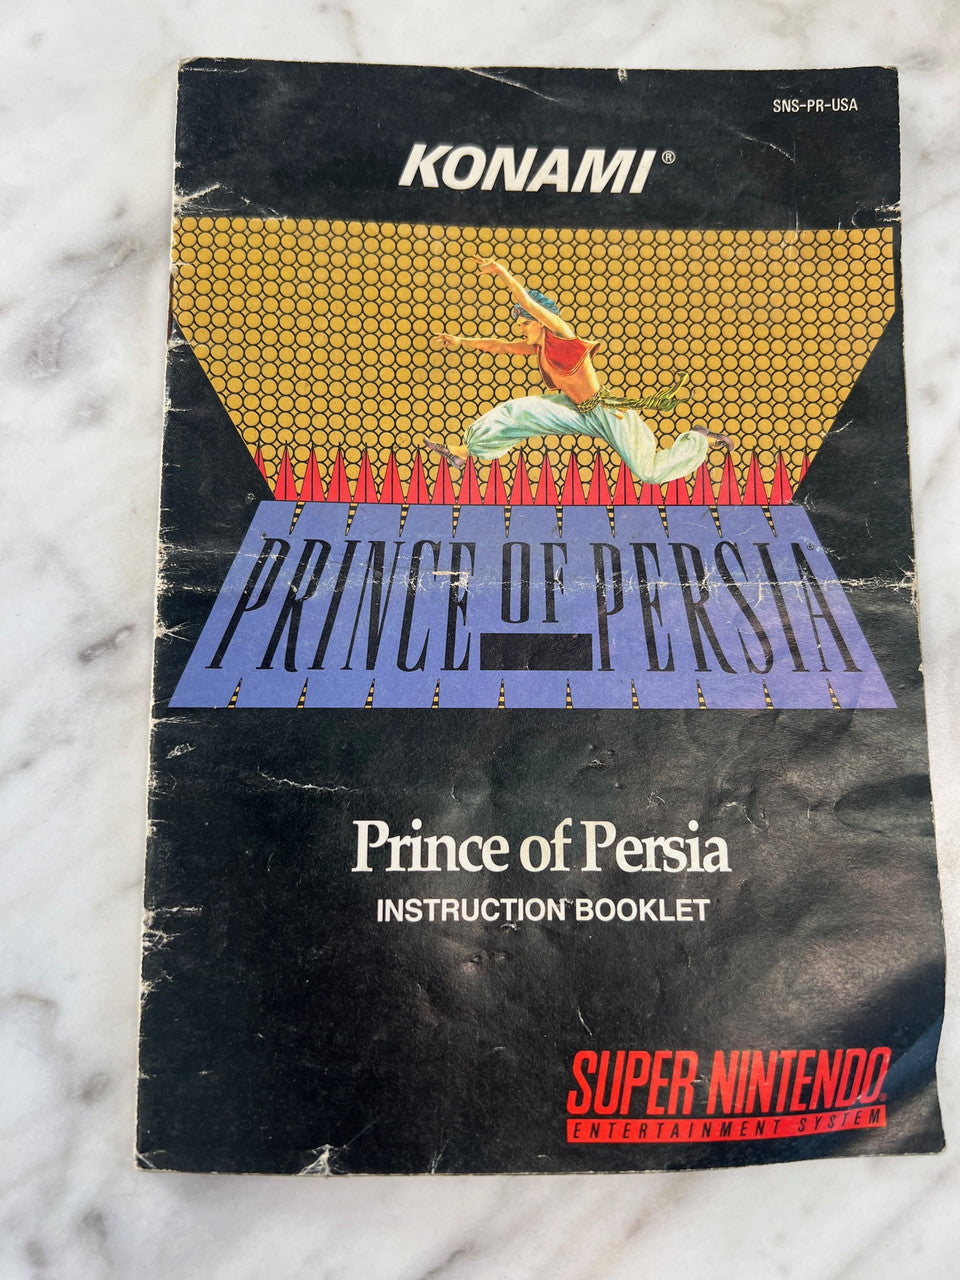 Prince of Persia SNES Super Nintendo manual only